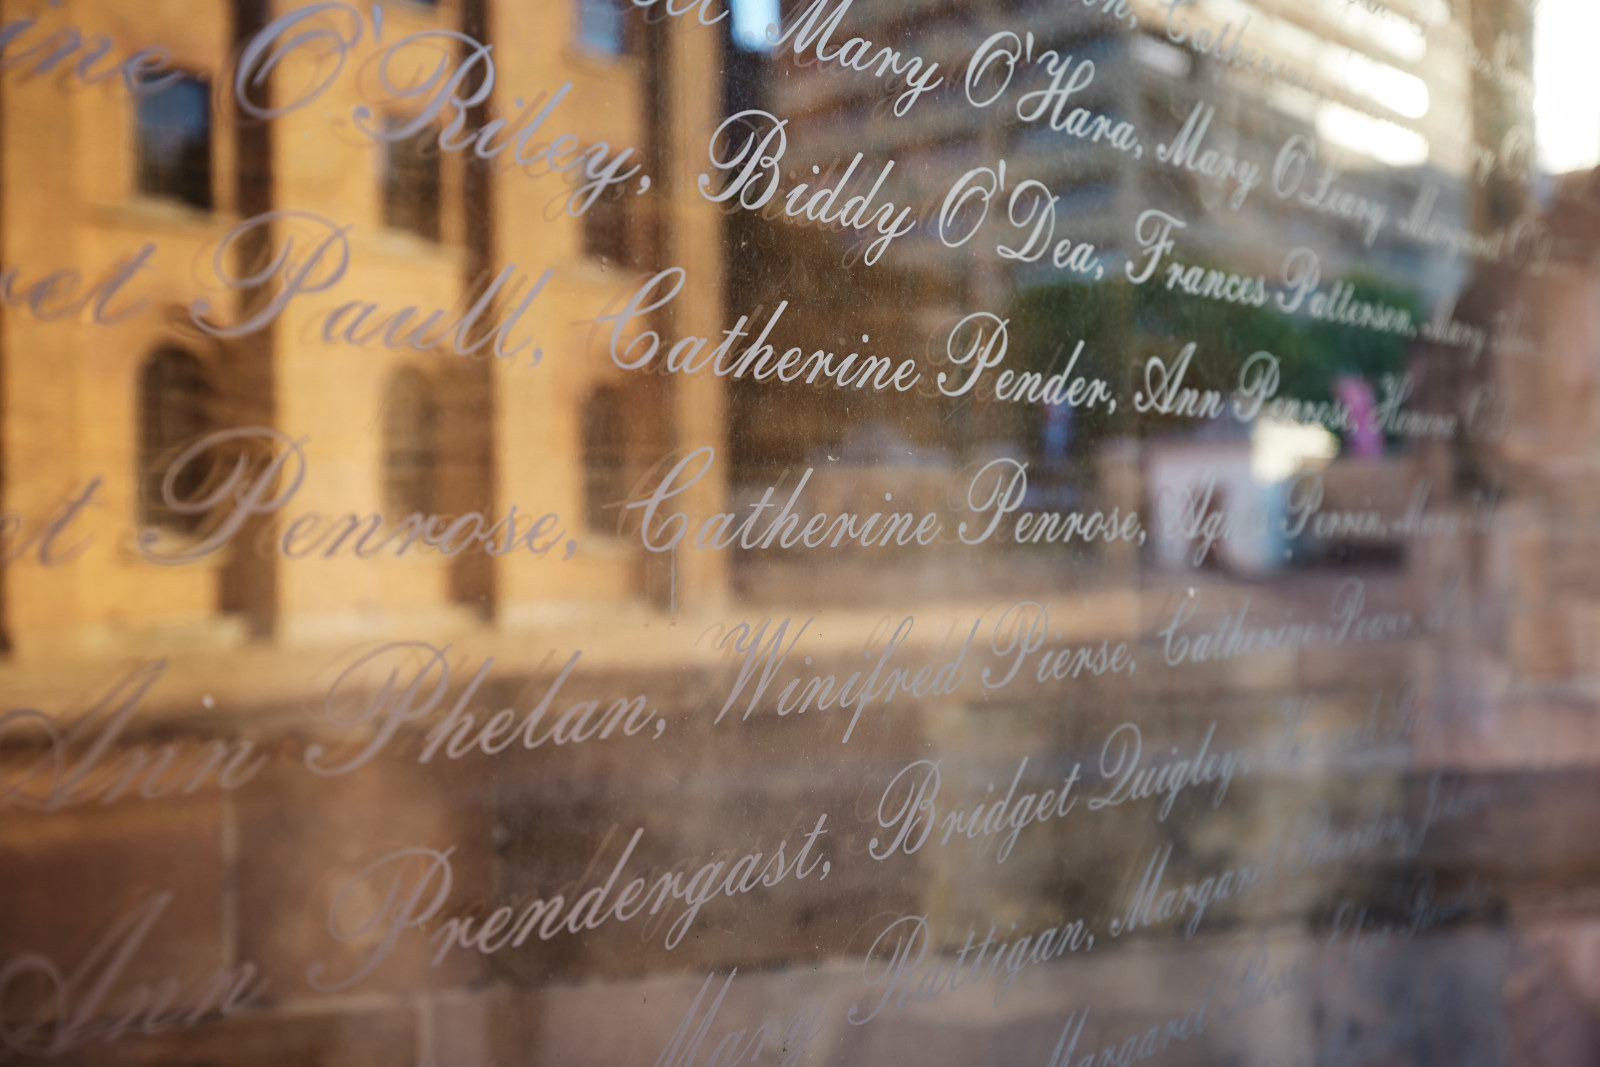 A reflection of the Hyde Park Barracks on the glass as part of 'An Gorta Mor', The Australian Monument to the Great Irish Famine